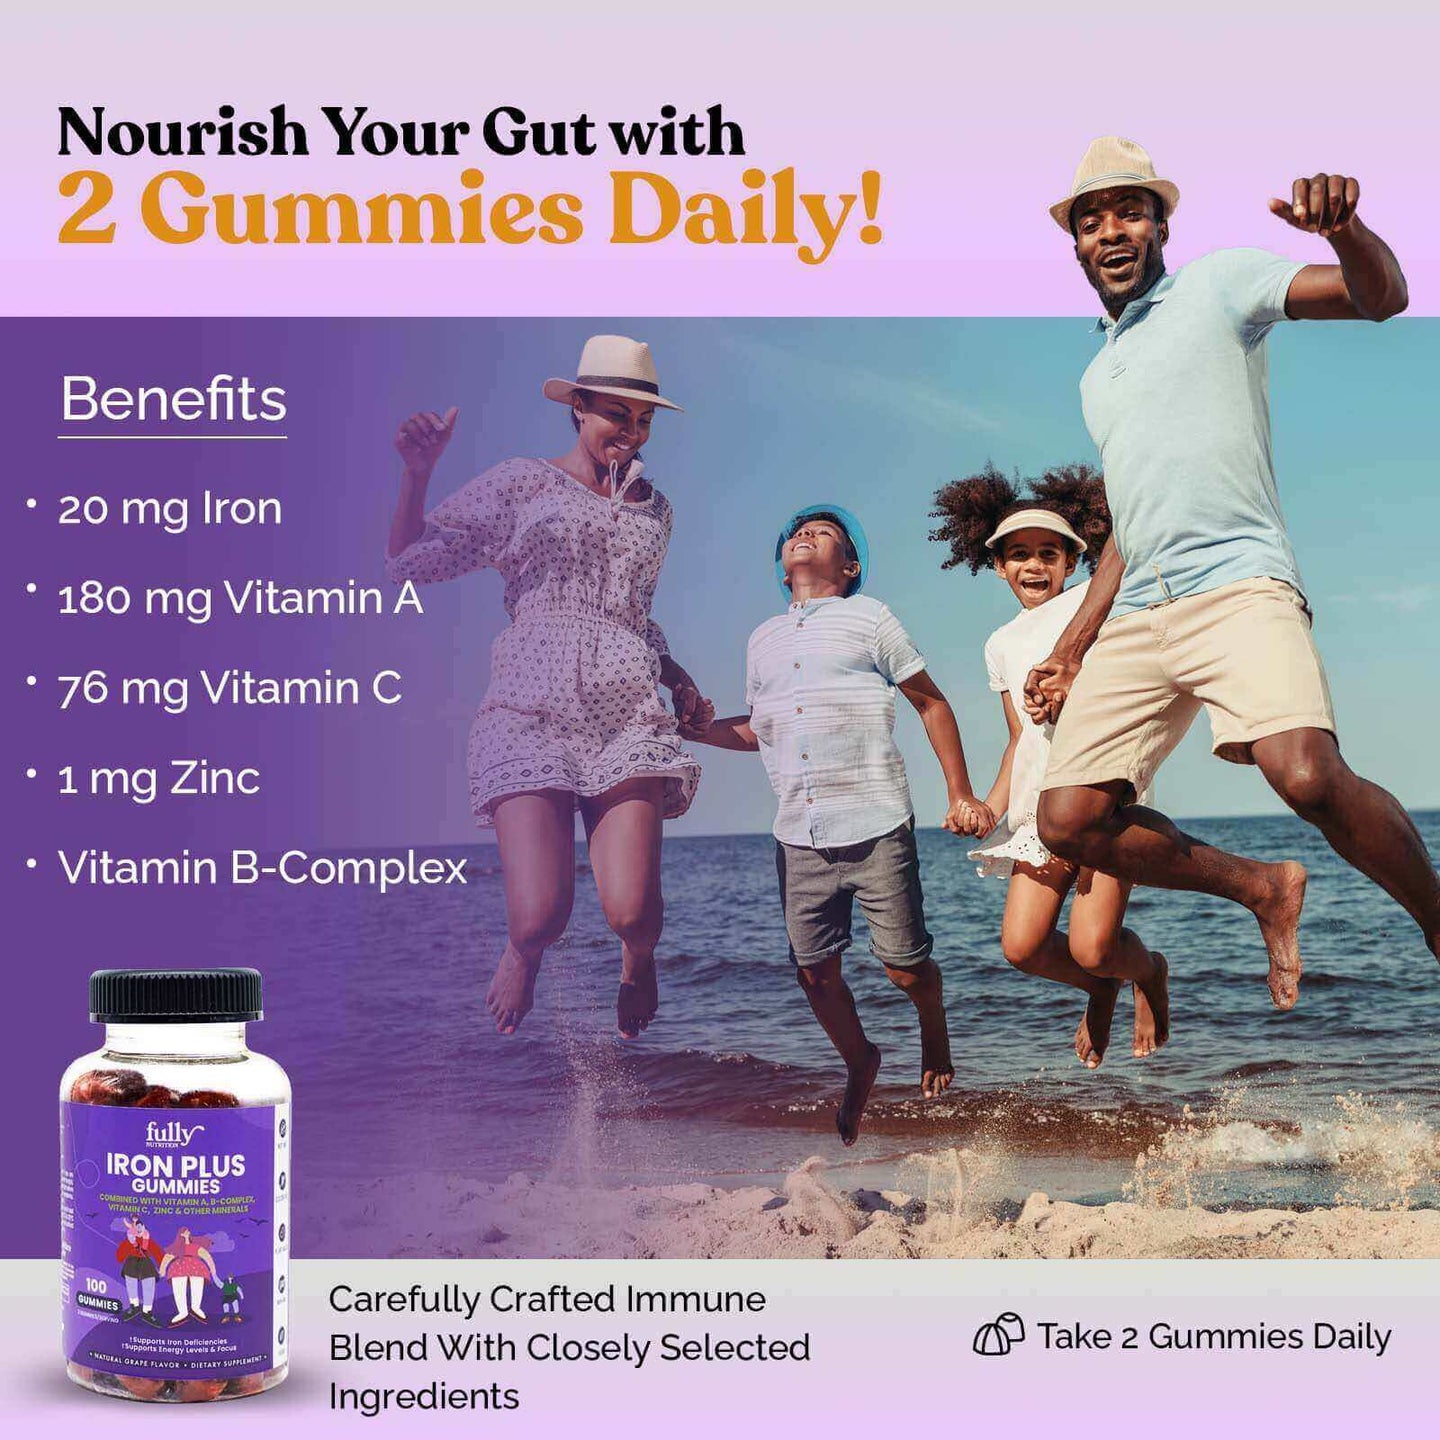 Nourish your gut and support healthy digestion with 2 Iron gummies daily from Fully Nutrition - a convenient and delicious way to ensure you're getting the essential nutrients your body needs.